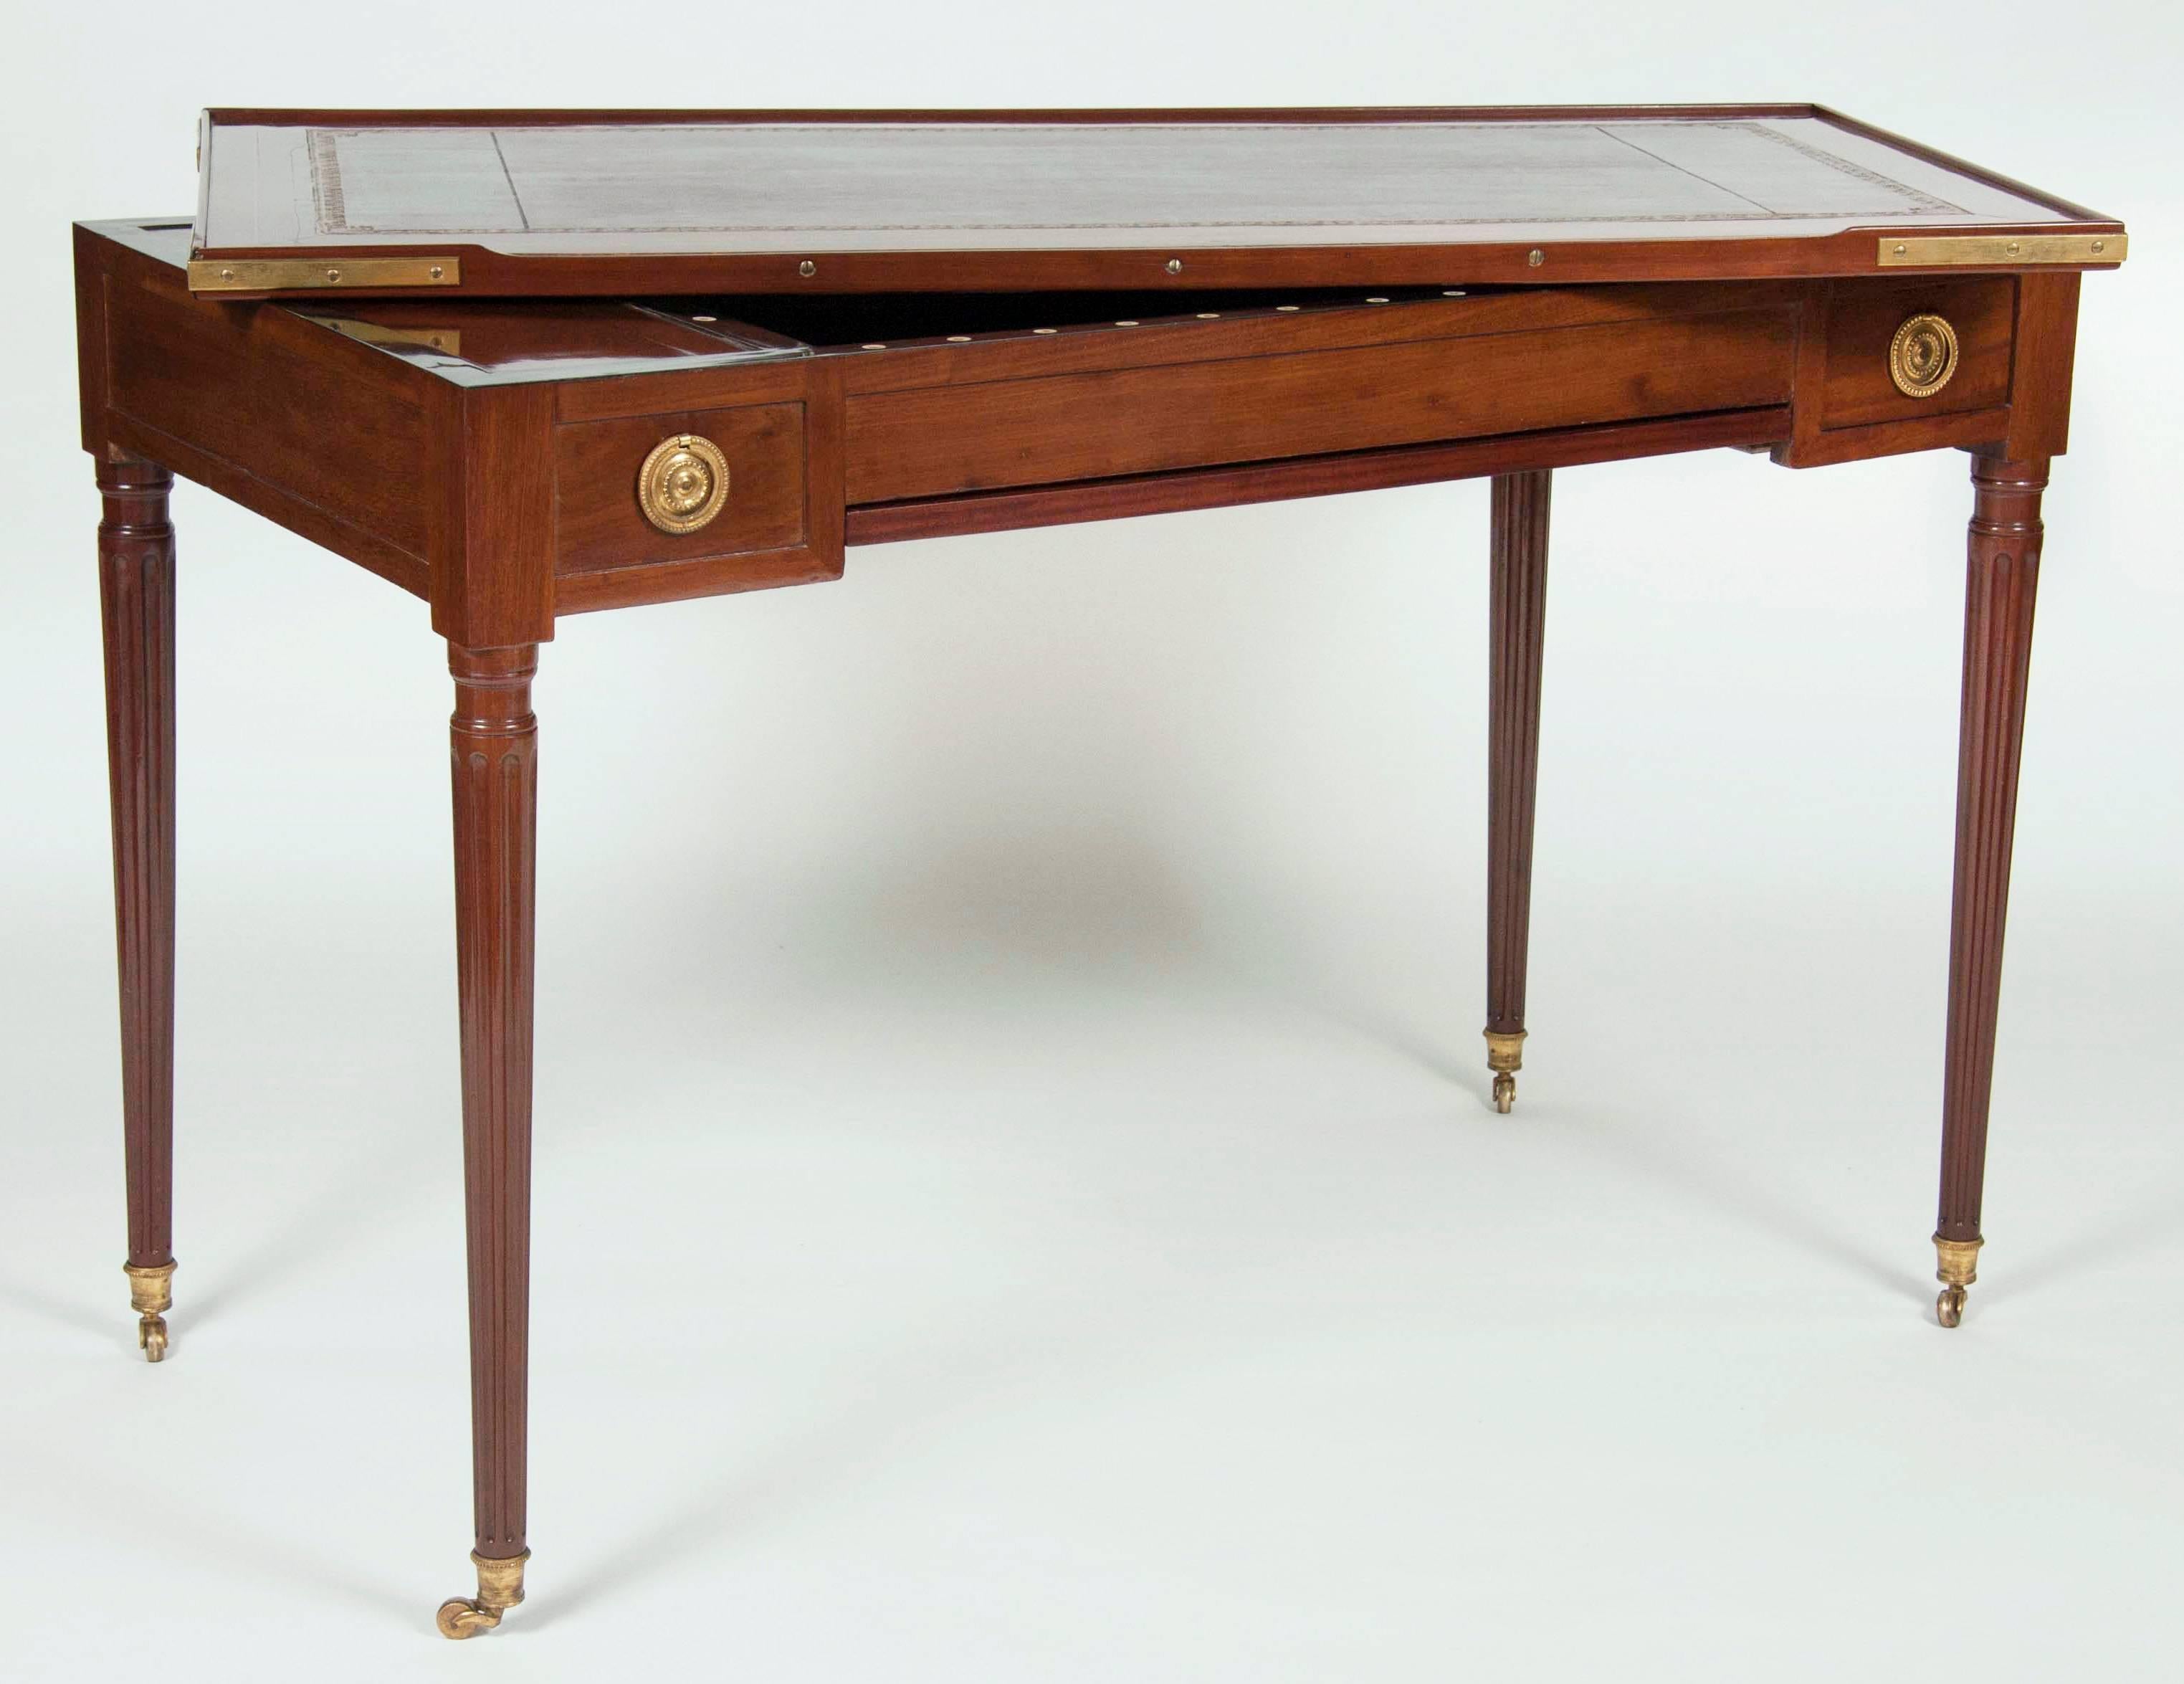 Stamped on base by maker Jean Louis Debierre, leather reversible top with baise on reverse, finely inlaid backgammon surface with game pieces and original silver plate candleholders, opposing drawers and lower slide out inlaid chess and on reverse